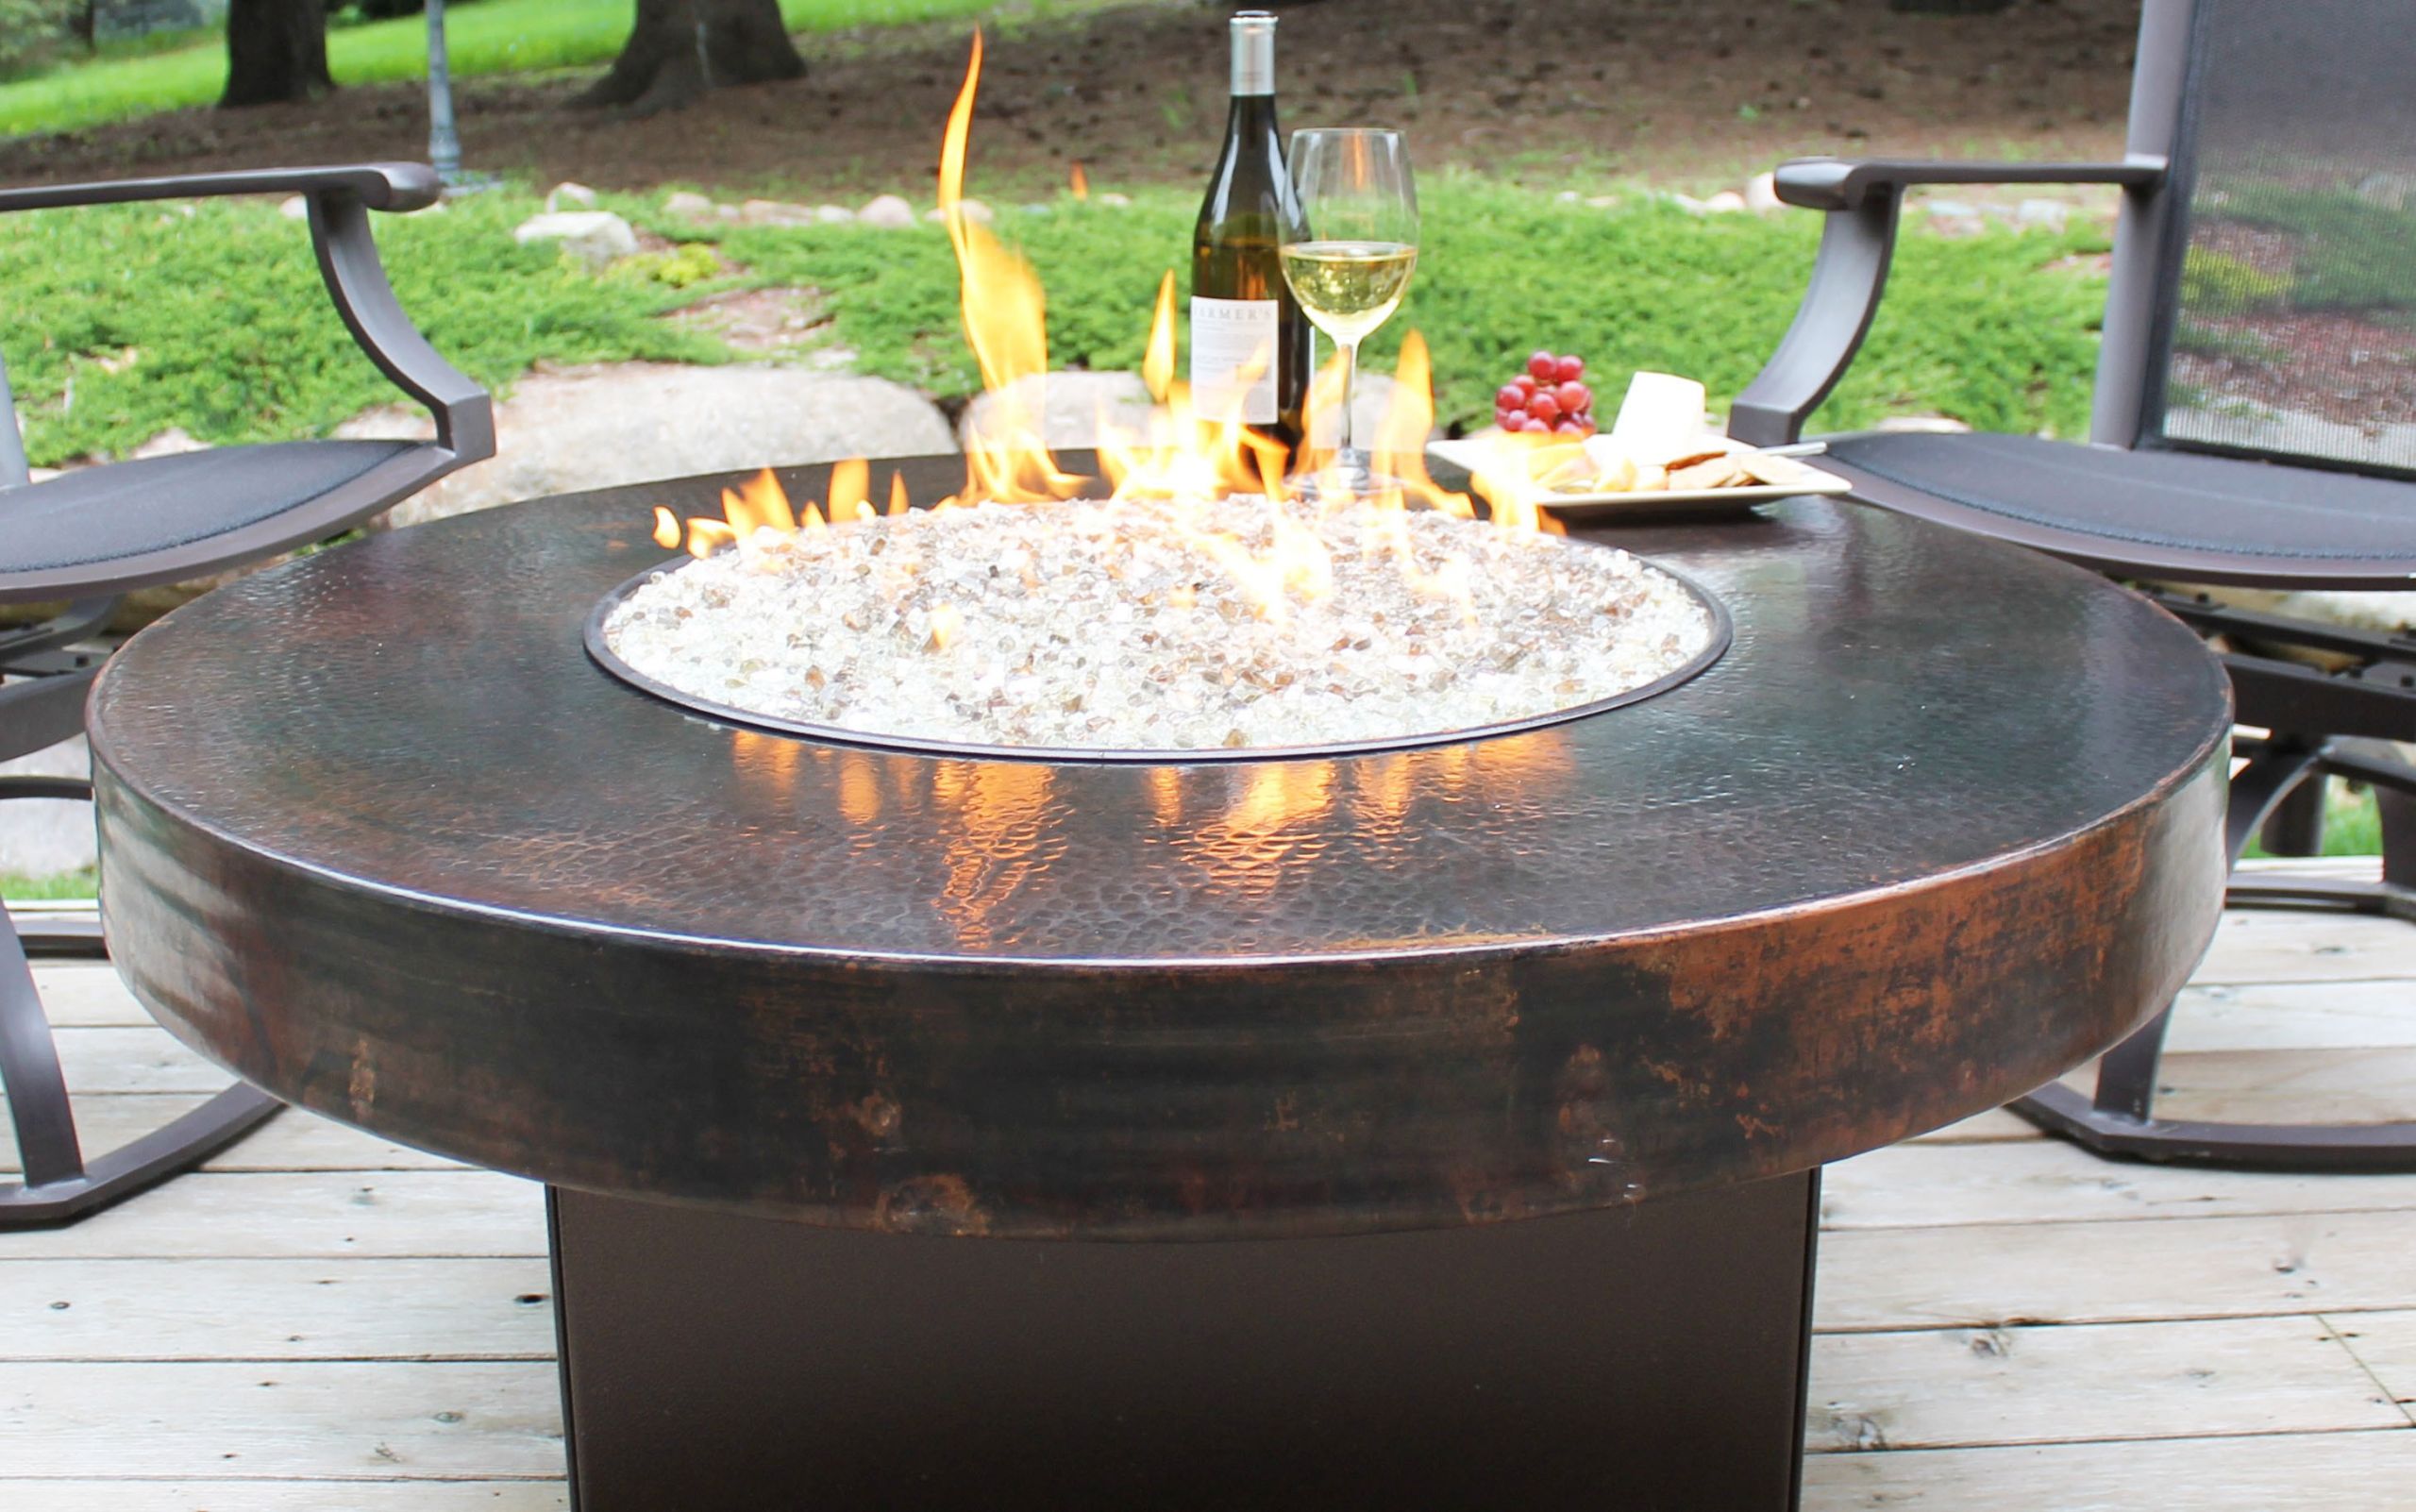 DIY Outdoor Propane Fire Pit
 How to Make Tabletop Fire Pit Kit DIY